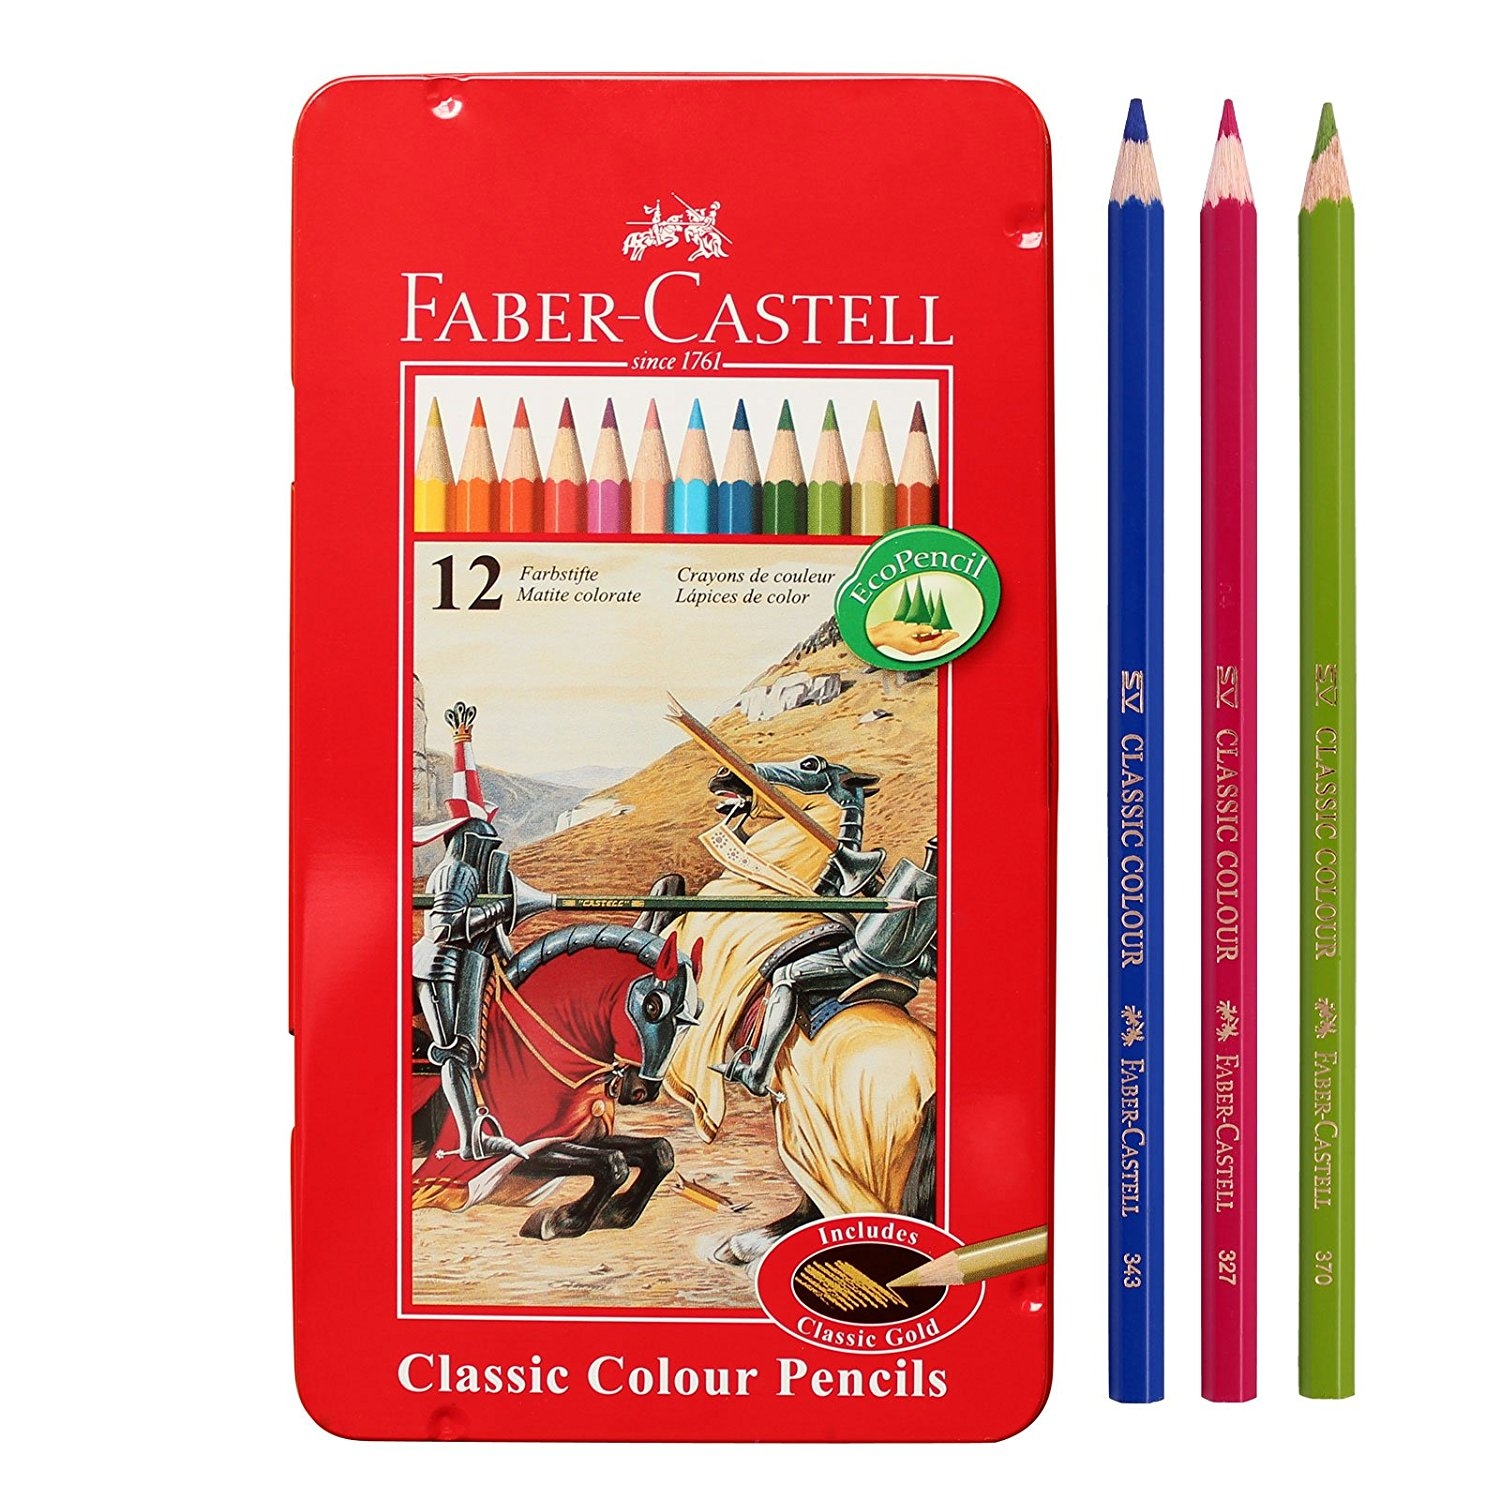 Faber-Castell pencil with attachment